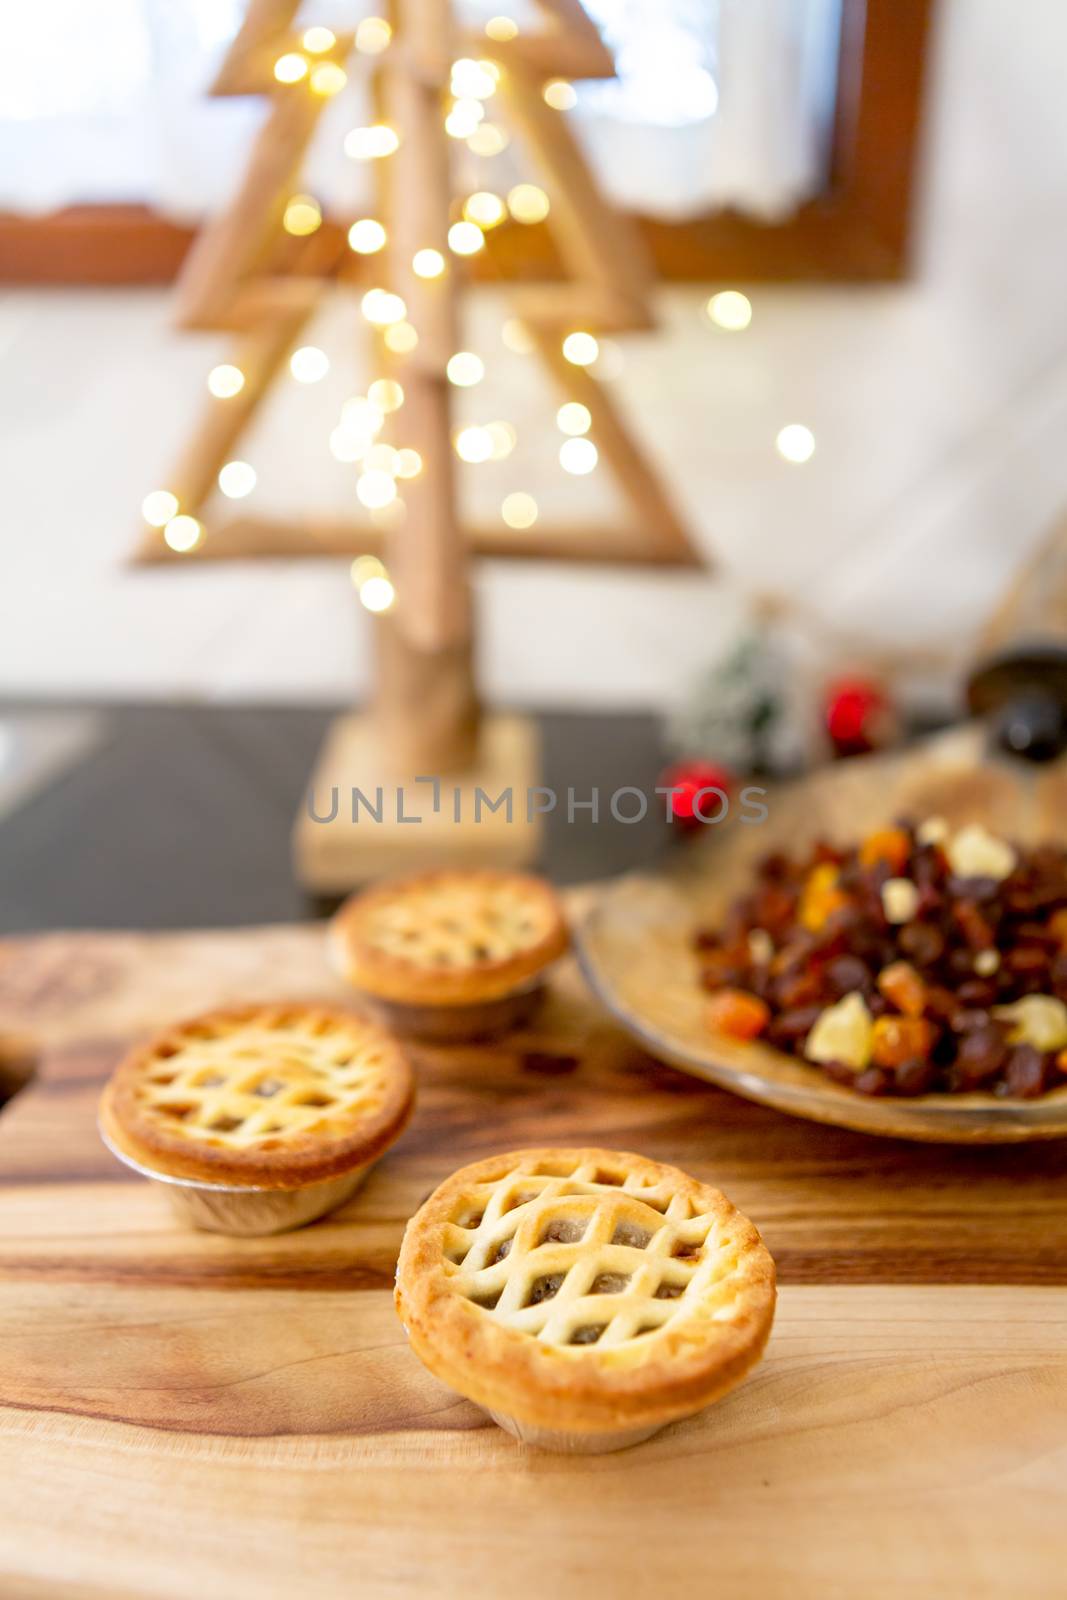 Christmas cooking - fruit mince tarts with pastry lattice top